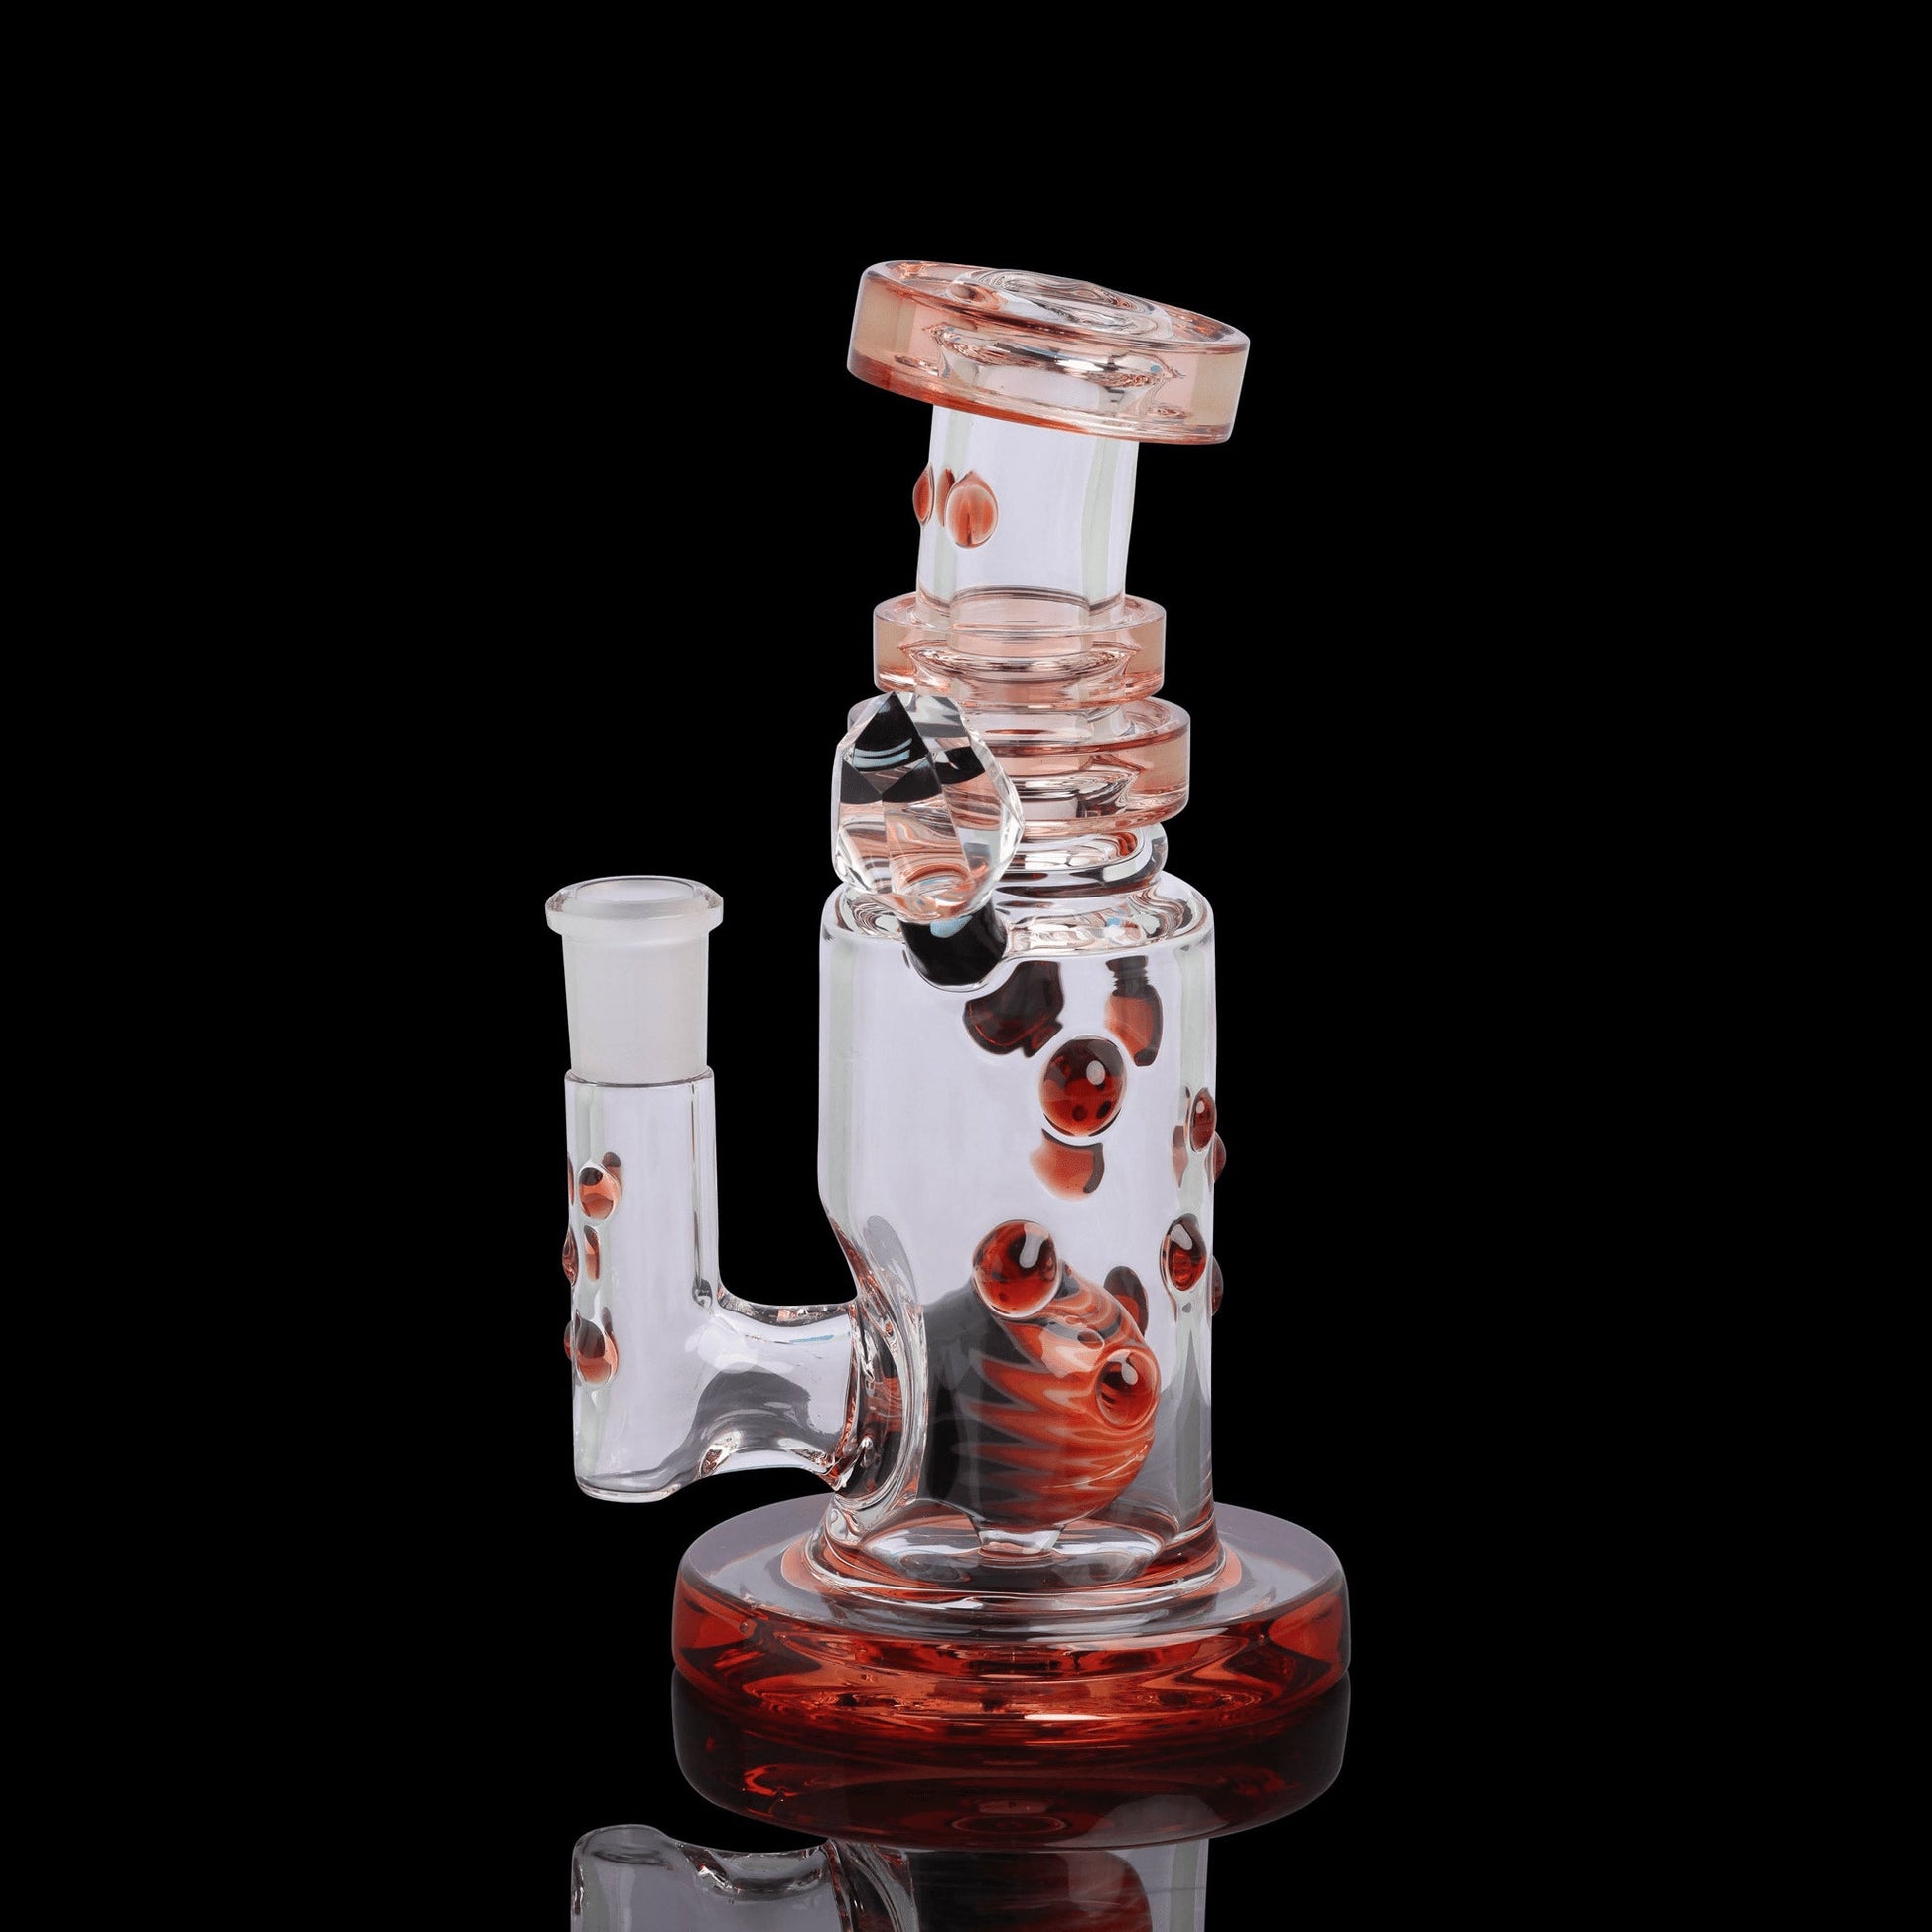 artisan-crafted design of the Rainbow Rig (D) by Chris Hubbard